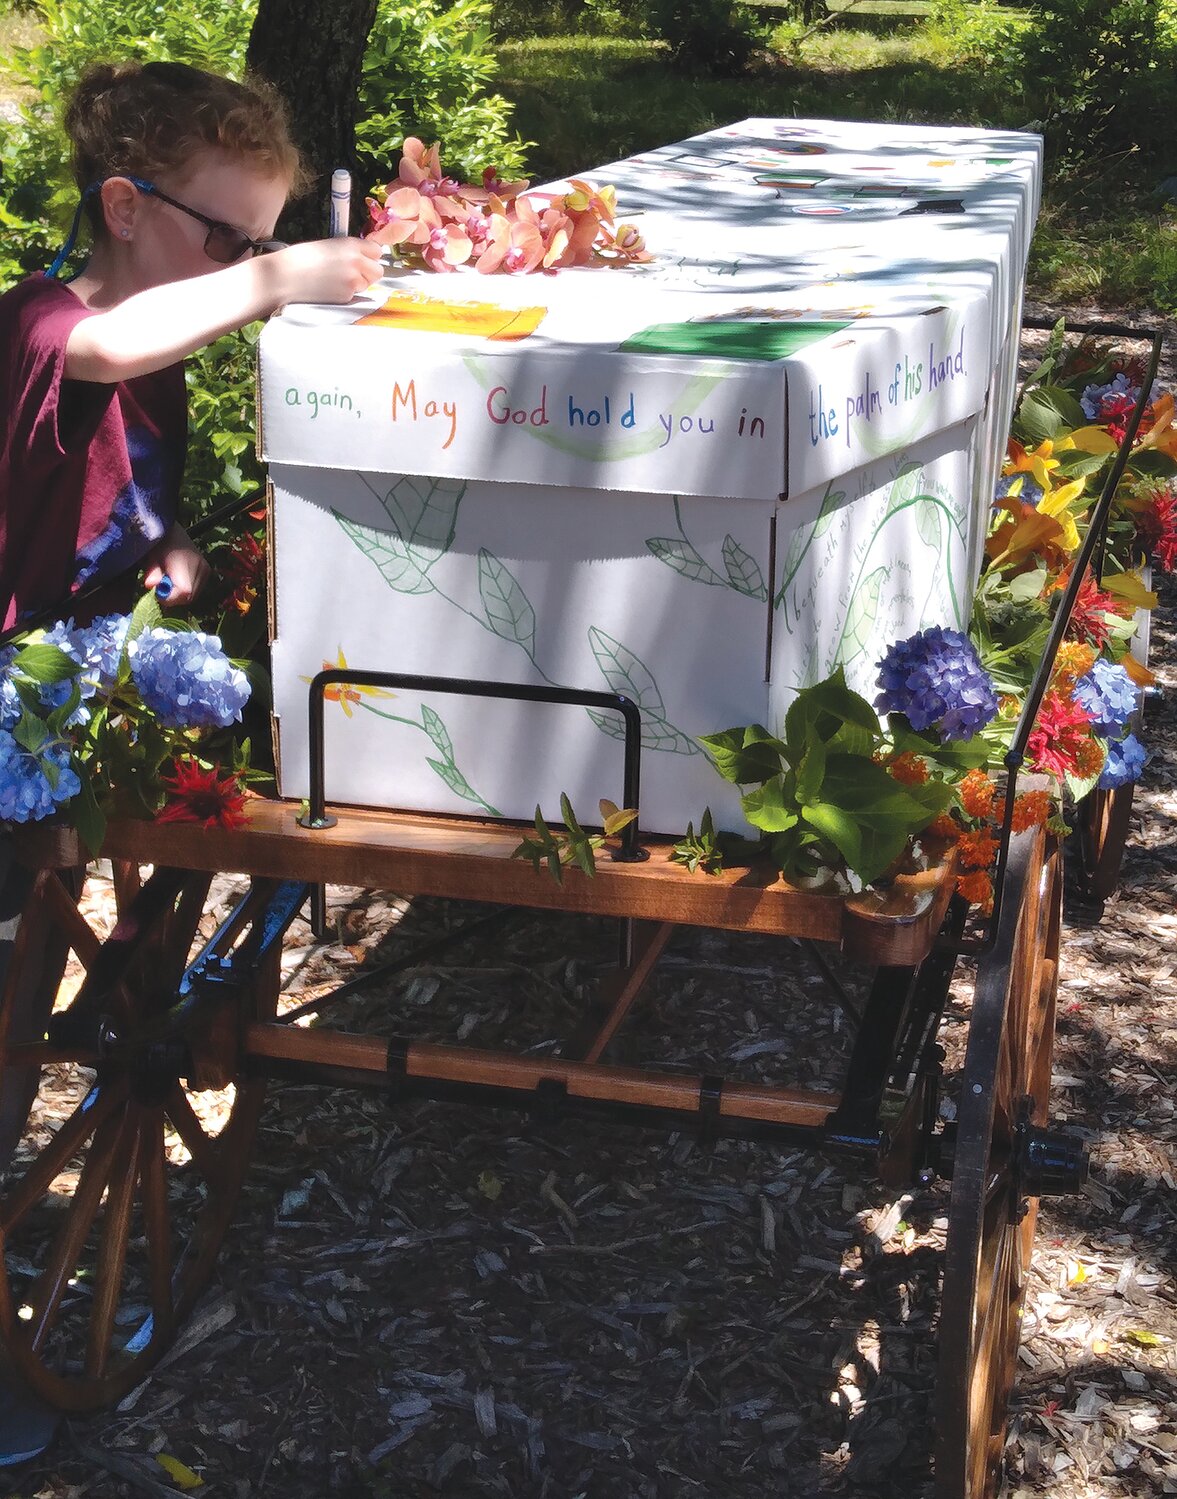 A mourner signs the outside of a coffin prior to burial at Prudence Memorial Park. “Natural” burial grounds like this use biodegradable coffins, no embalming, and allow the burial site to revegetate naturally. Memorial plantings of native species are welcomed.